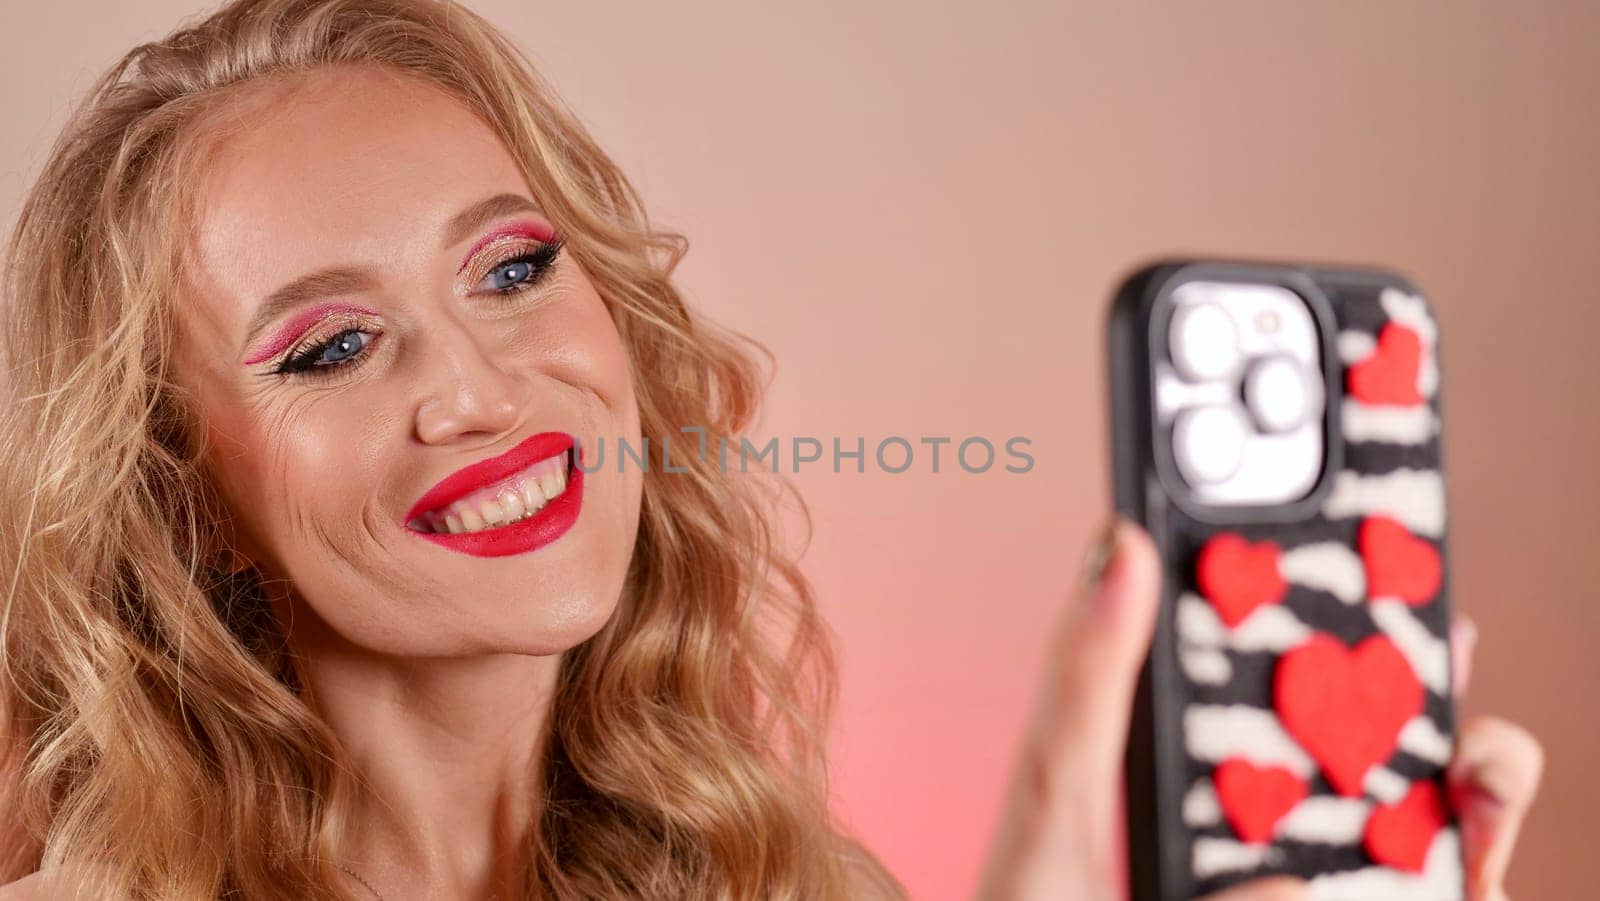 Blonde Woman with red lips Taking a Selfie by OksanaFedorchuk